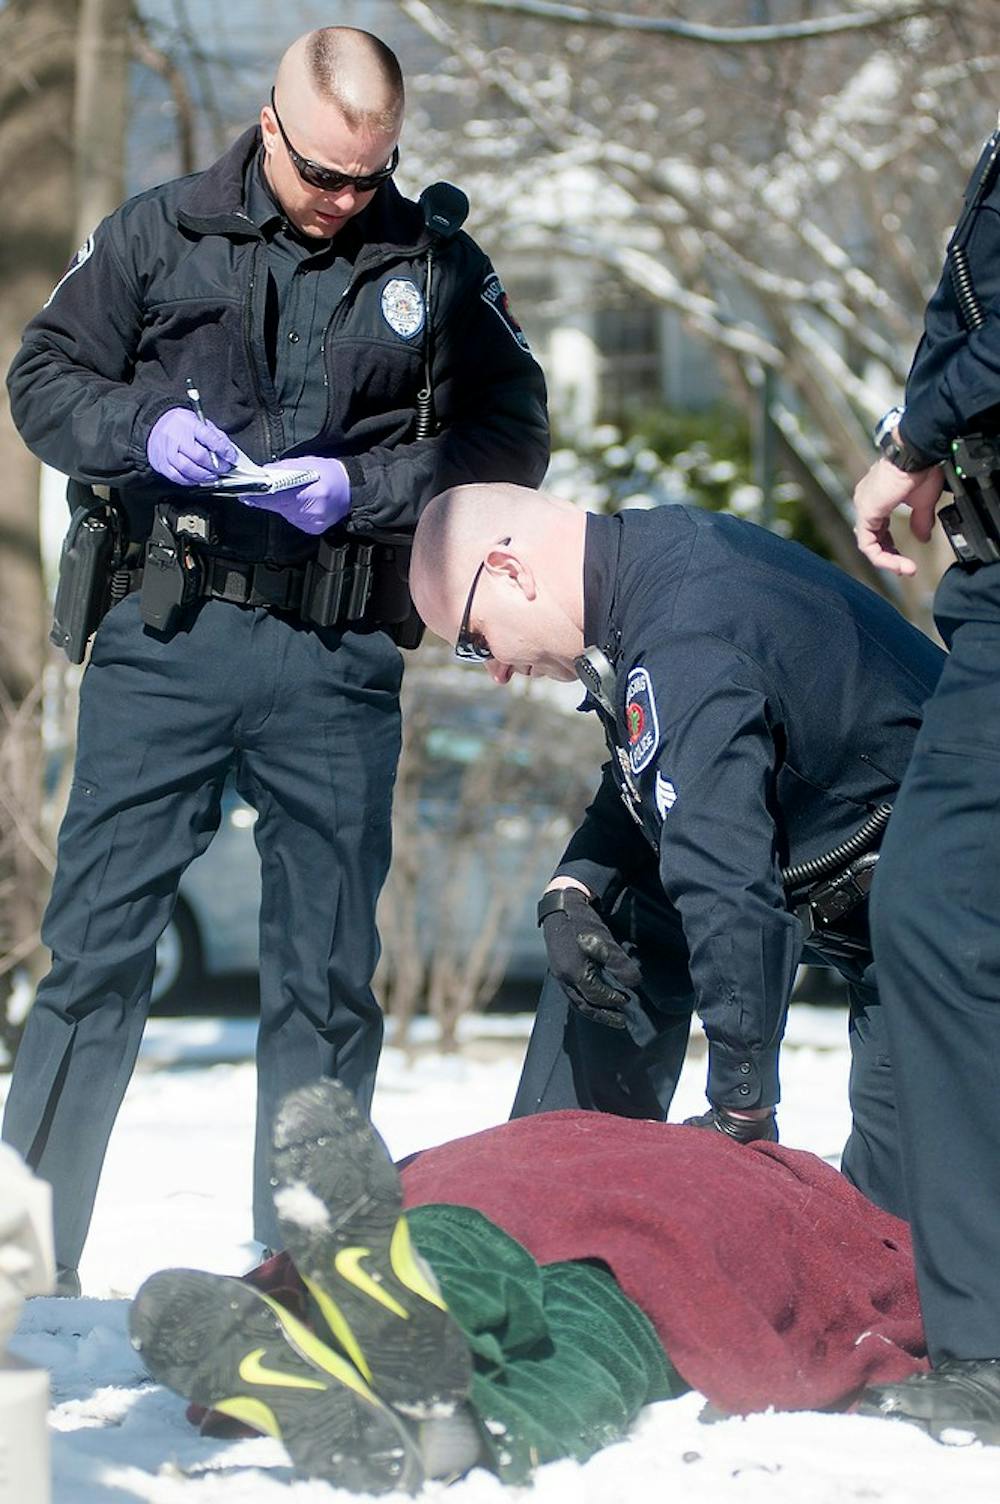 	<p>Officer Erich Vedder, left, and Sgt. Marc Smith tend to an individual after he ran into a lamp post after being questioned about his age and having alcohol with him Sunday on Forest Street. Smith was one of the many <span class="caps">ELPD</span> officers patrolling during St. Patrick&#8217;s Day. Julia Nagy/The State News</p>